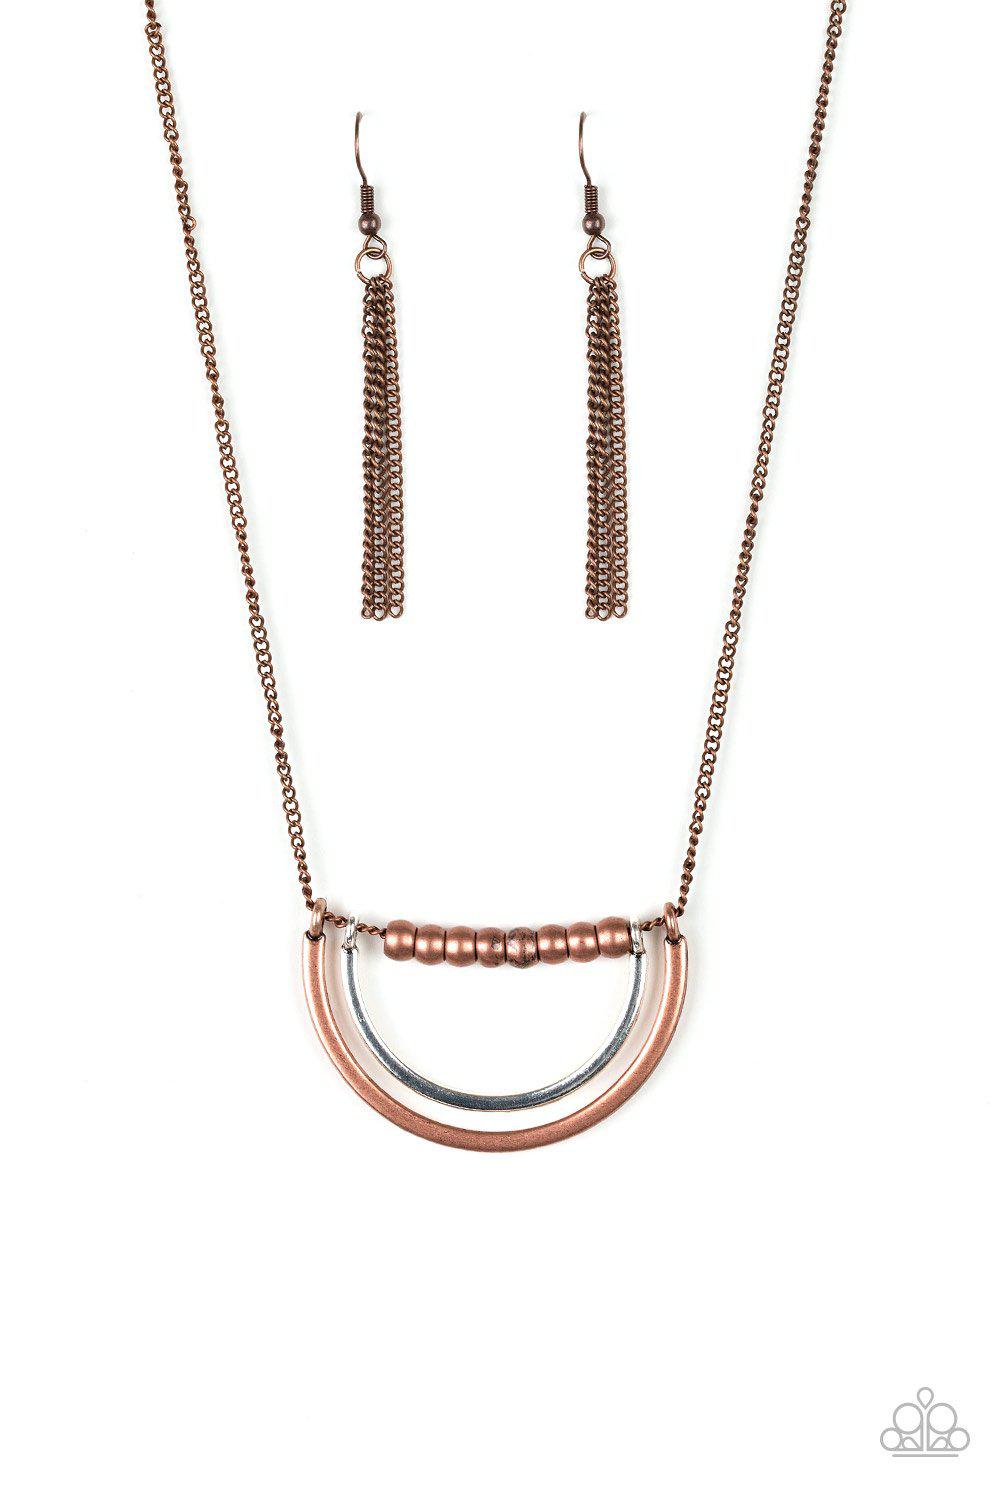 Artificial Arches Copper Necklace - Paparazzi Accessories - lightbox -CarasShop.com - $5 Jewelry by Cara Jewels